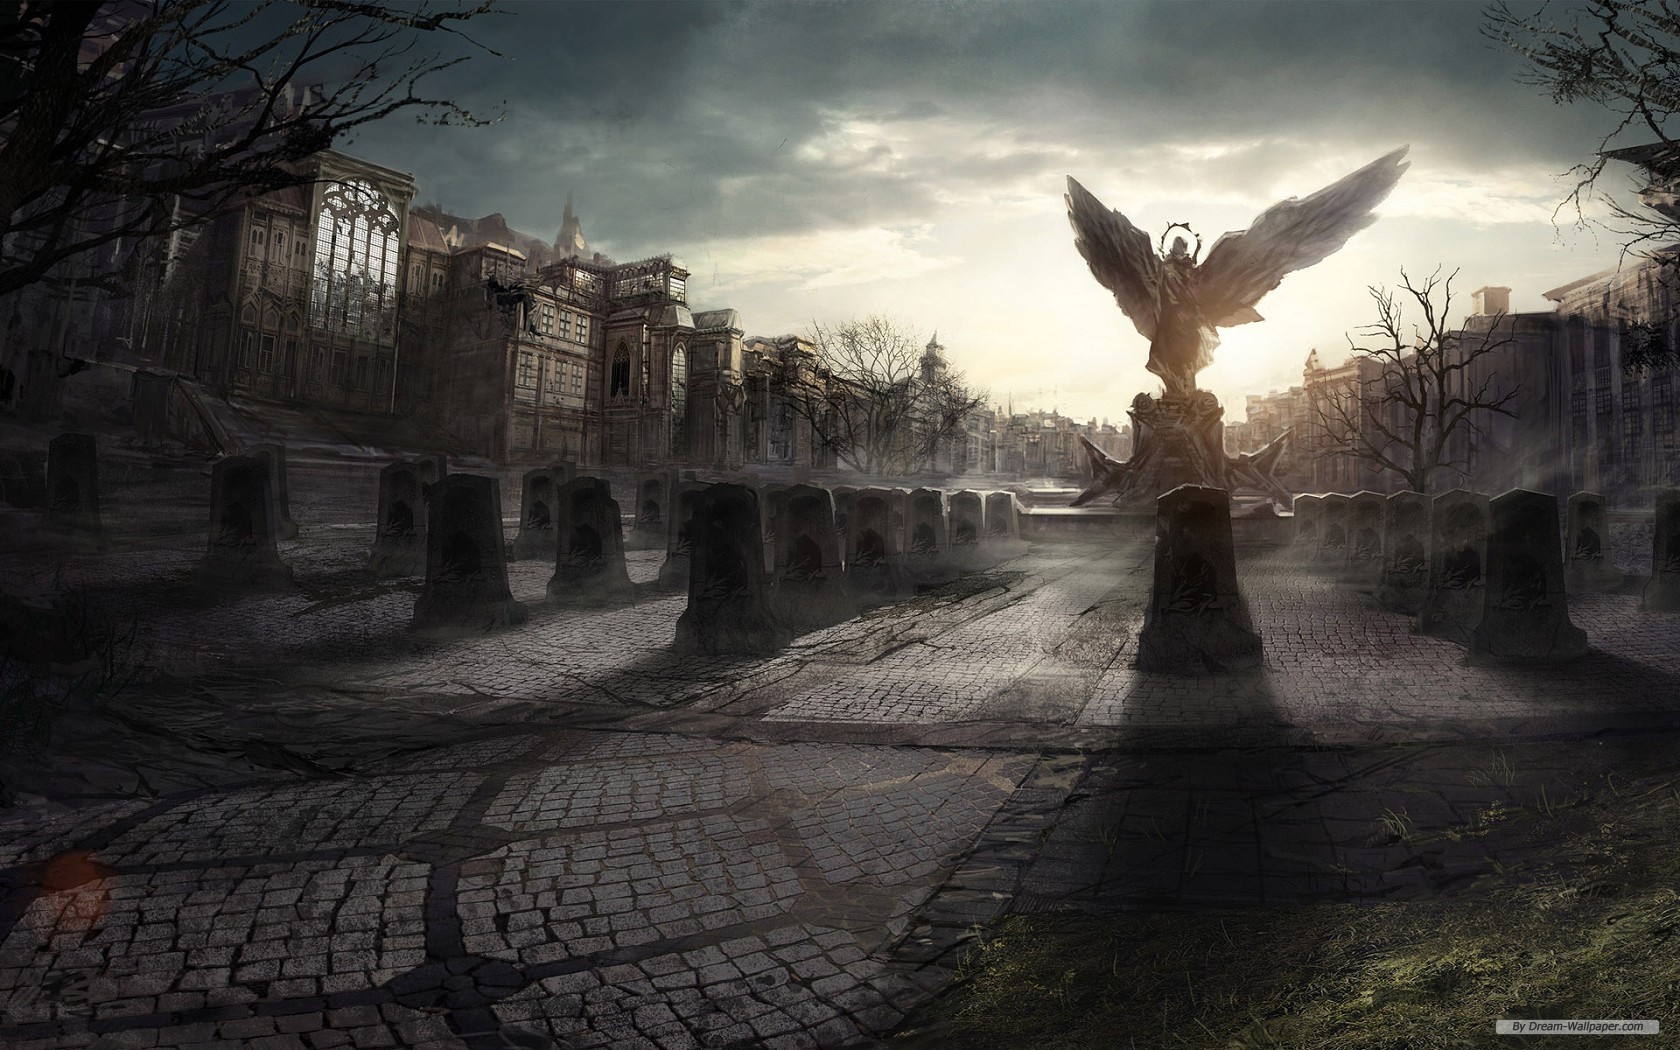 Stunning fantasy scene depicting an angel standing in a haunting graveyard.